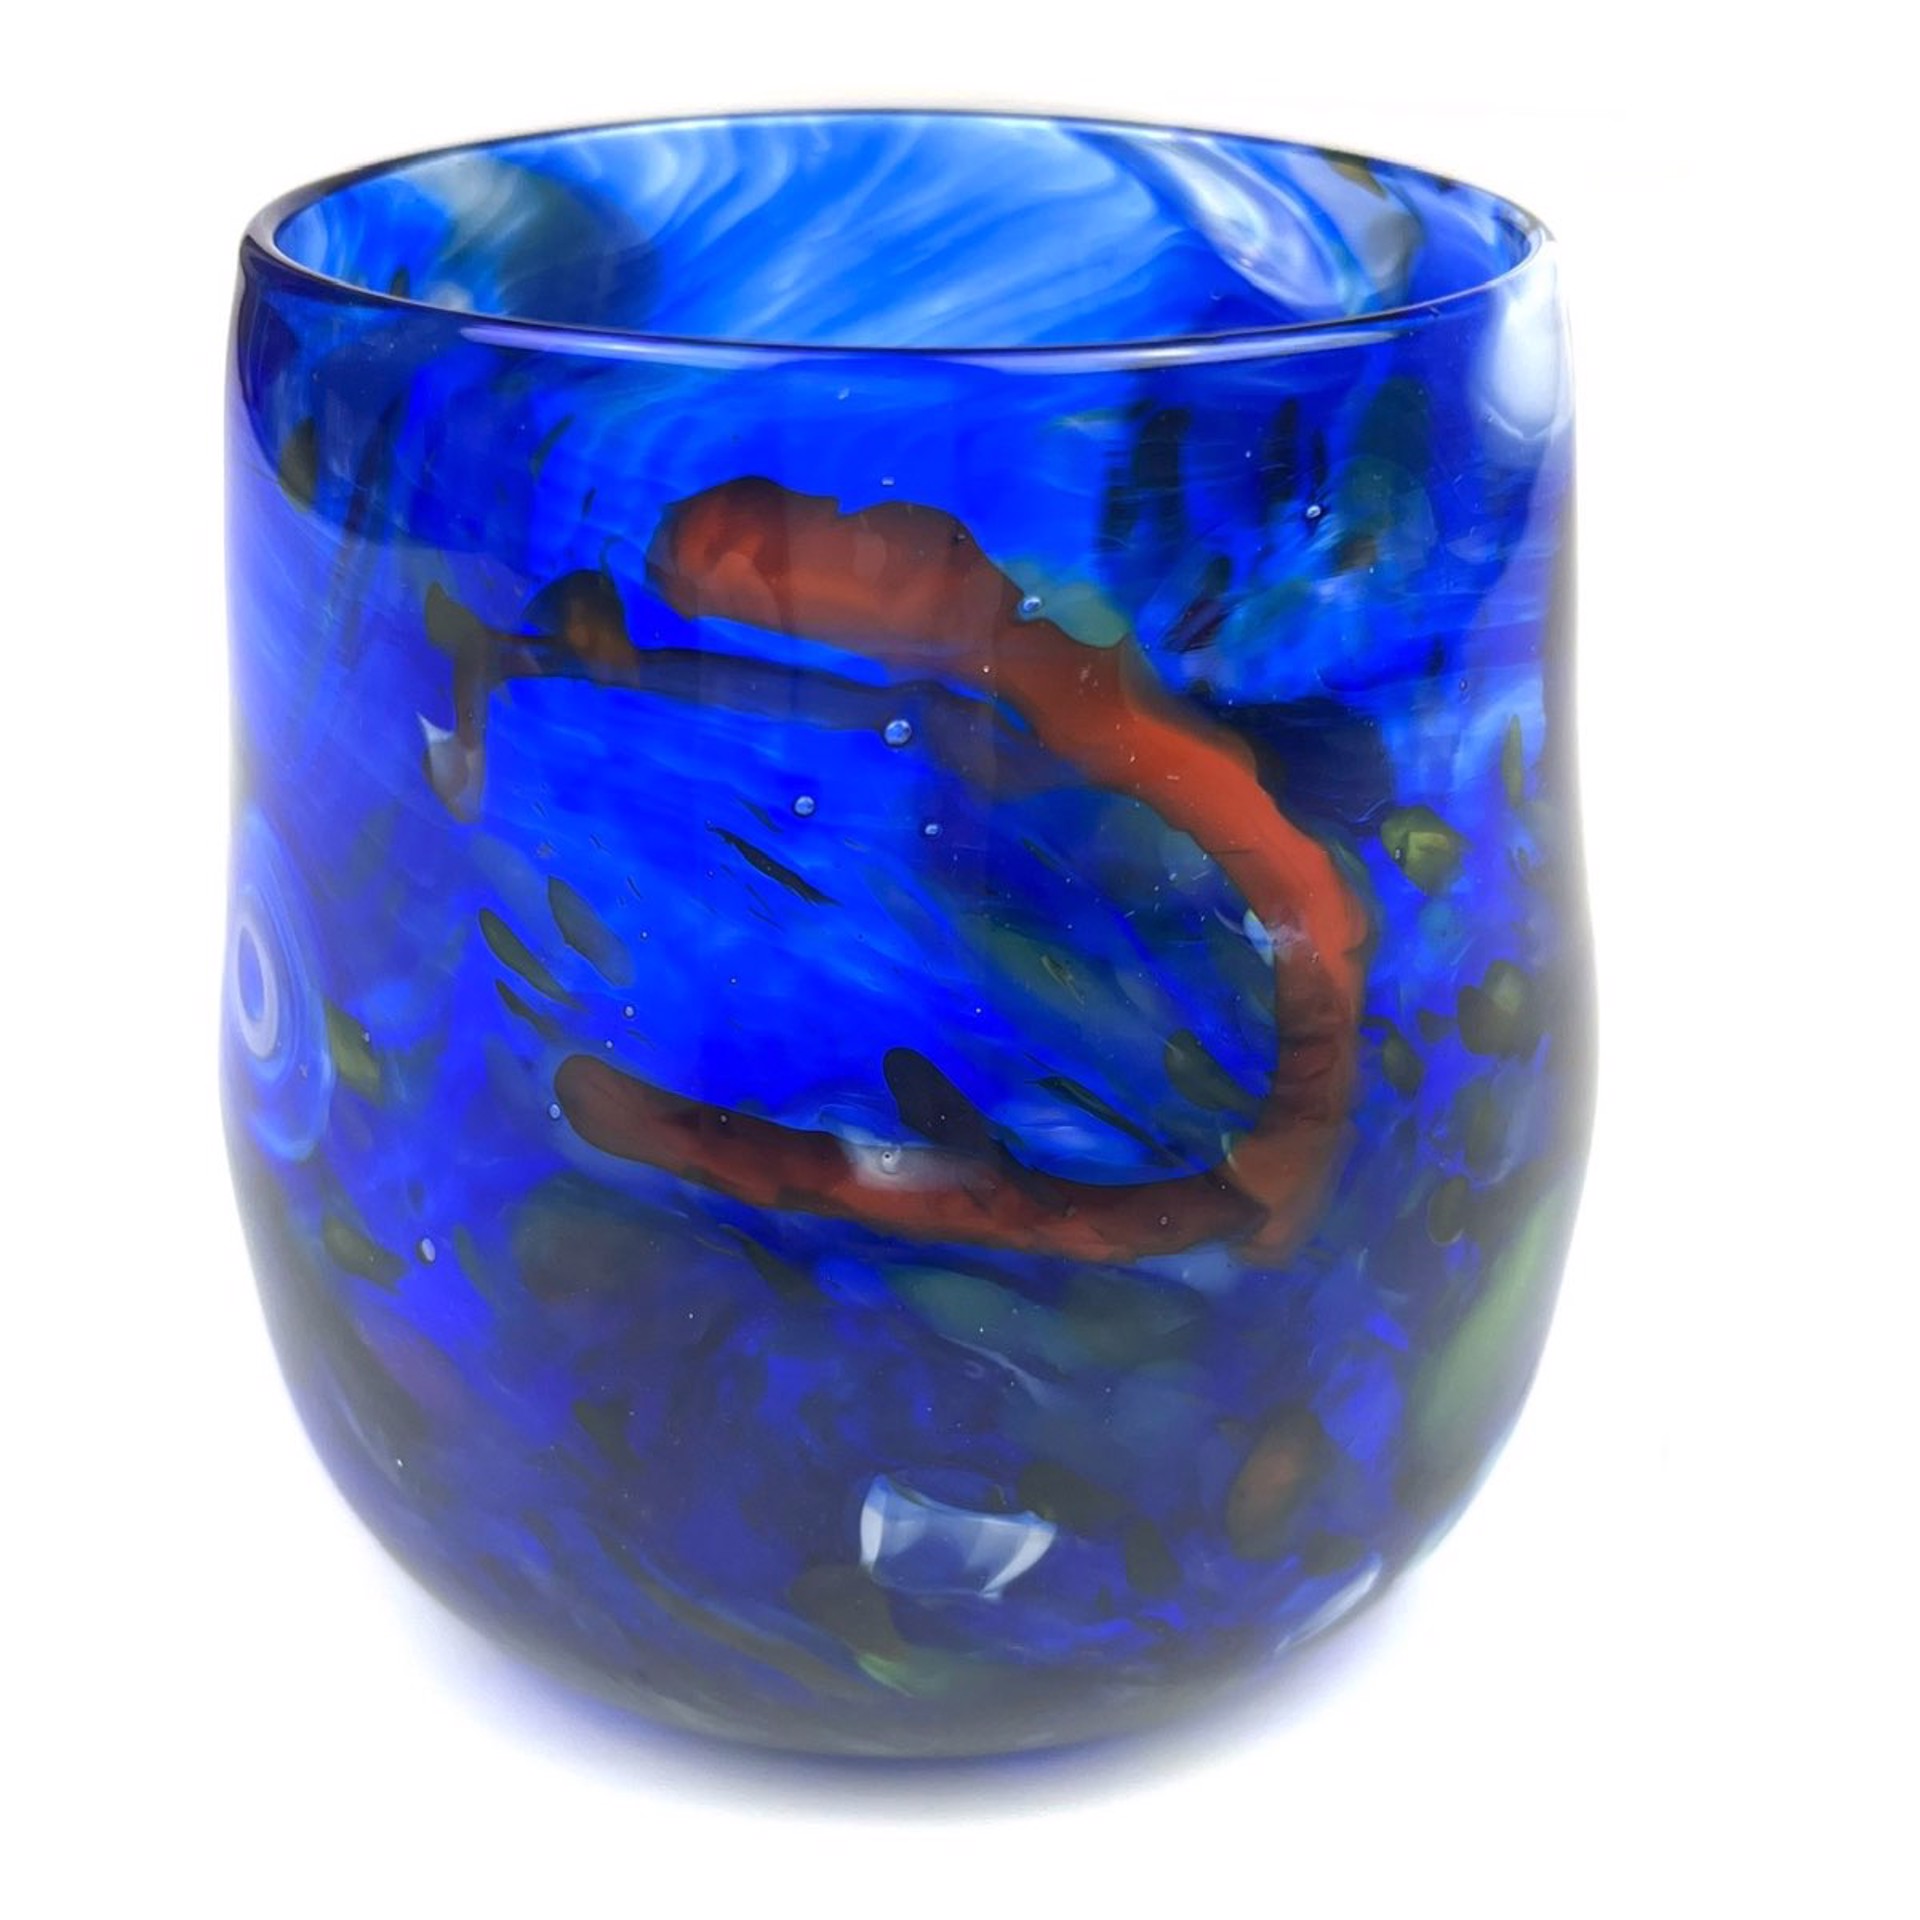 Stemless Wine Glass by Chad Balster